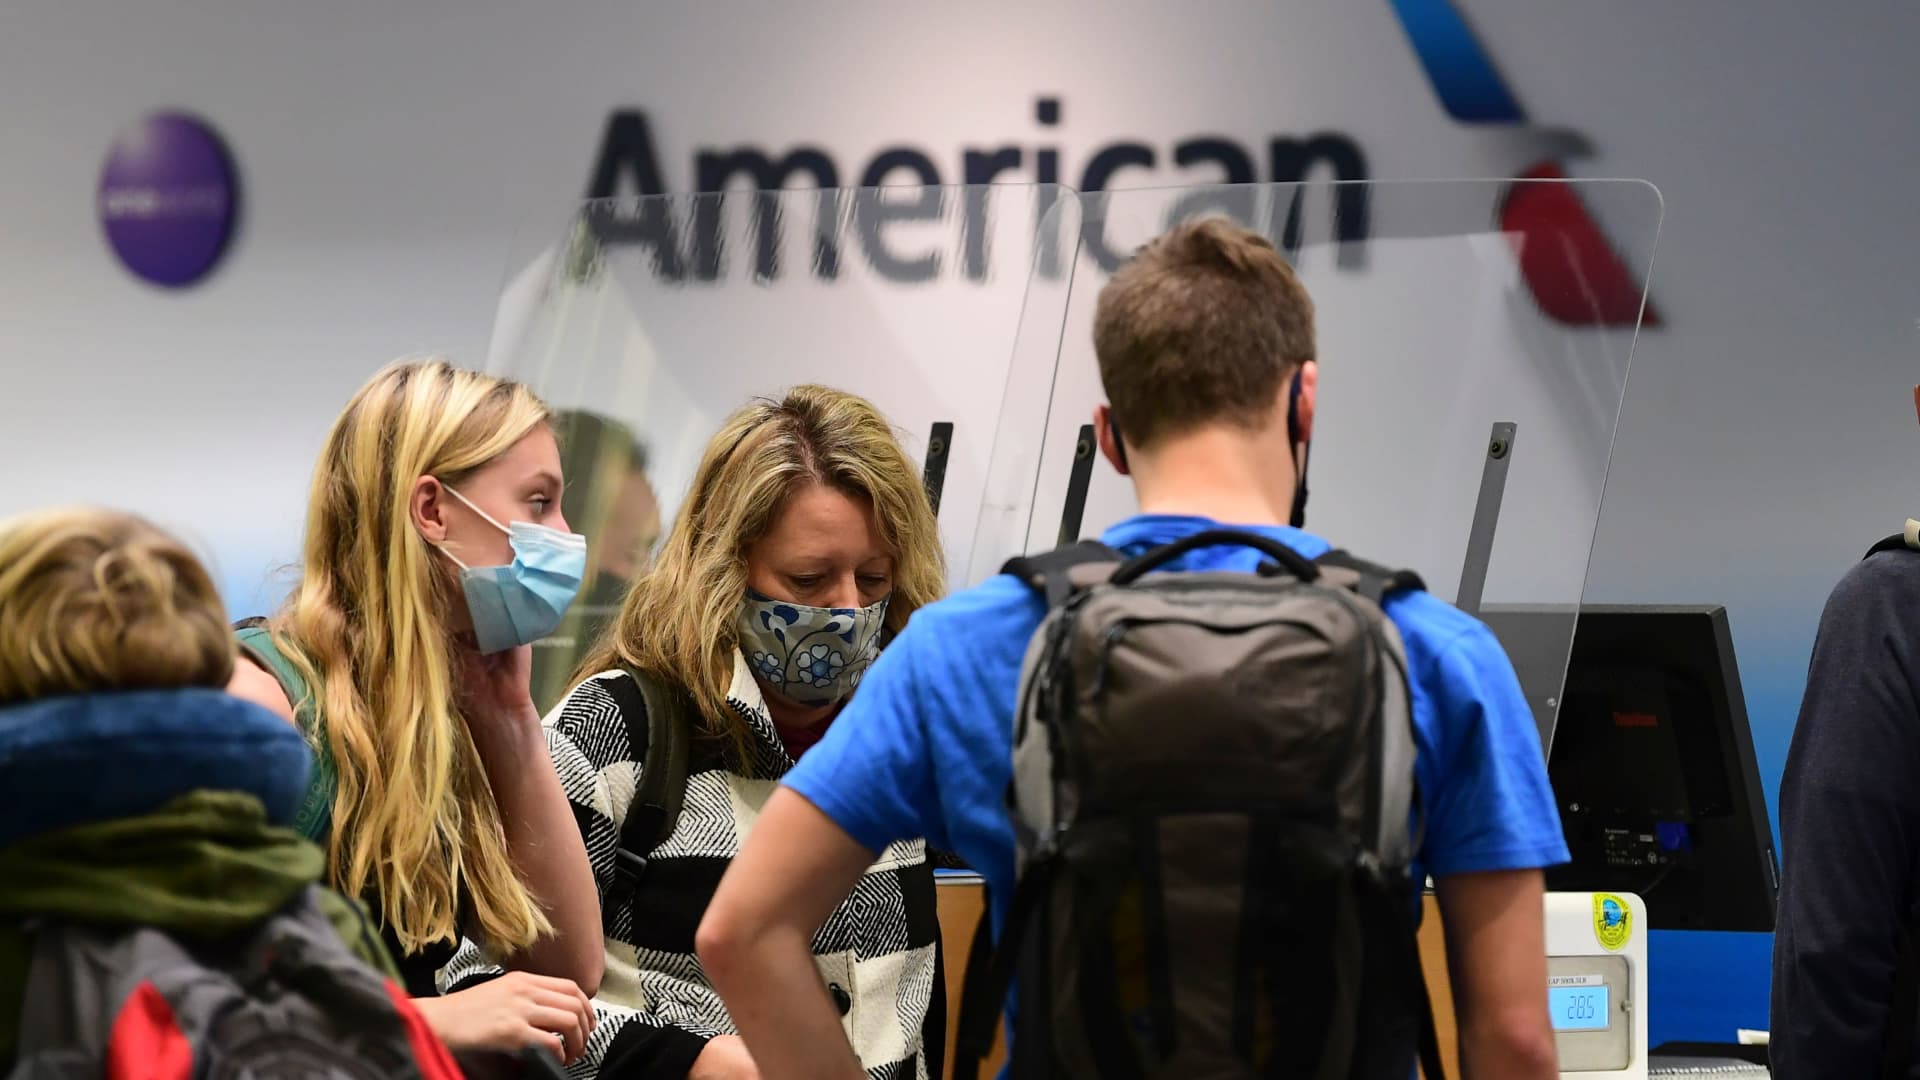 Travelers at the American Airlines check-in counter at Los Angeles International Airport on October 1, 2020.